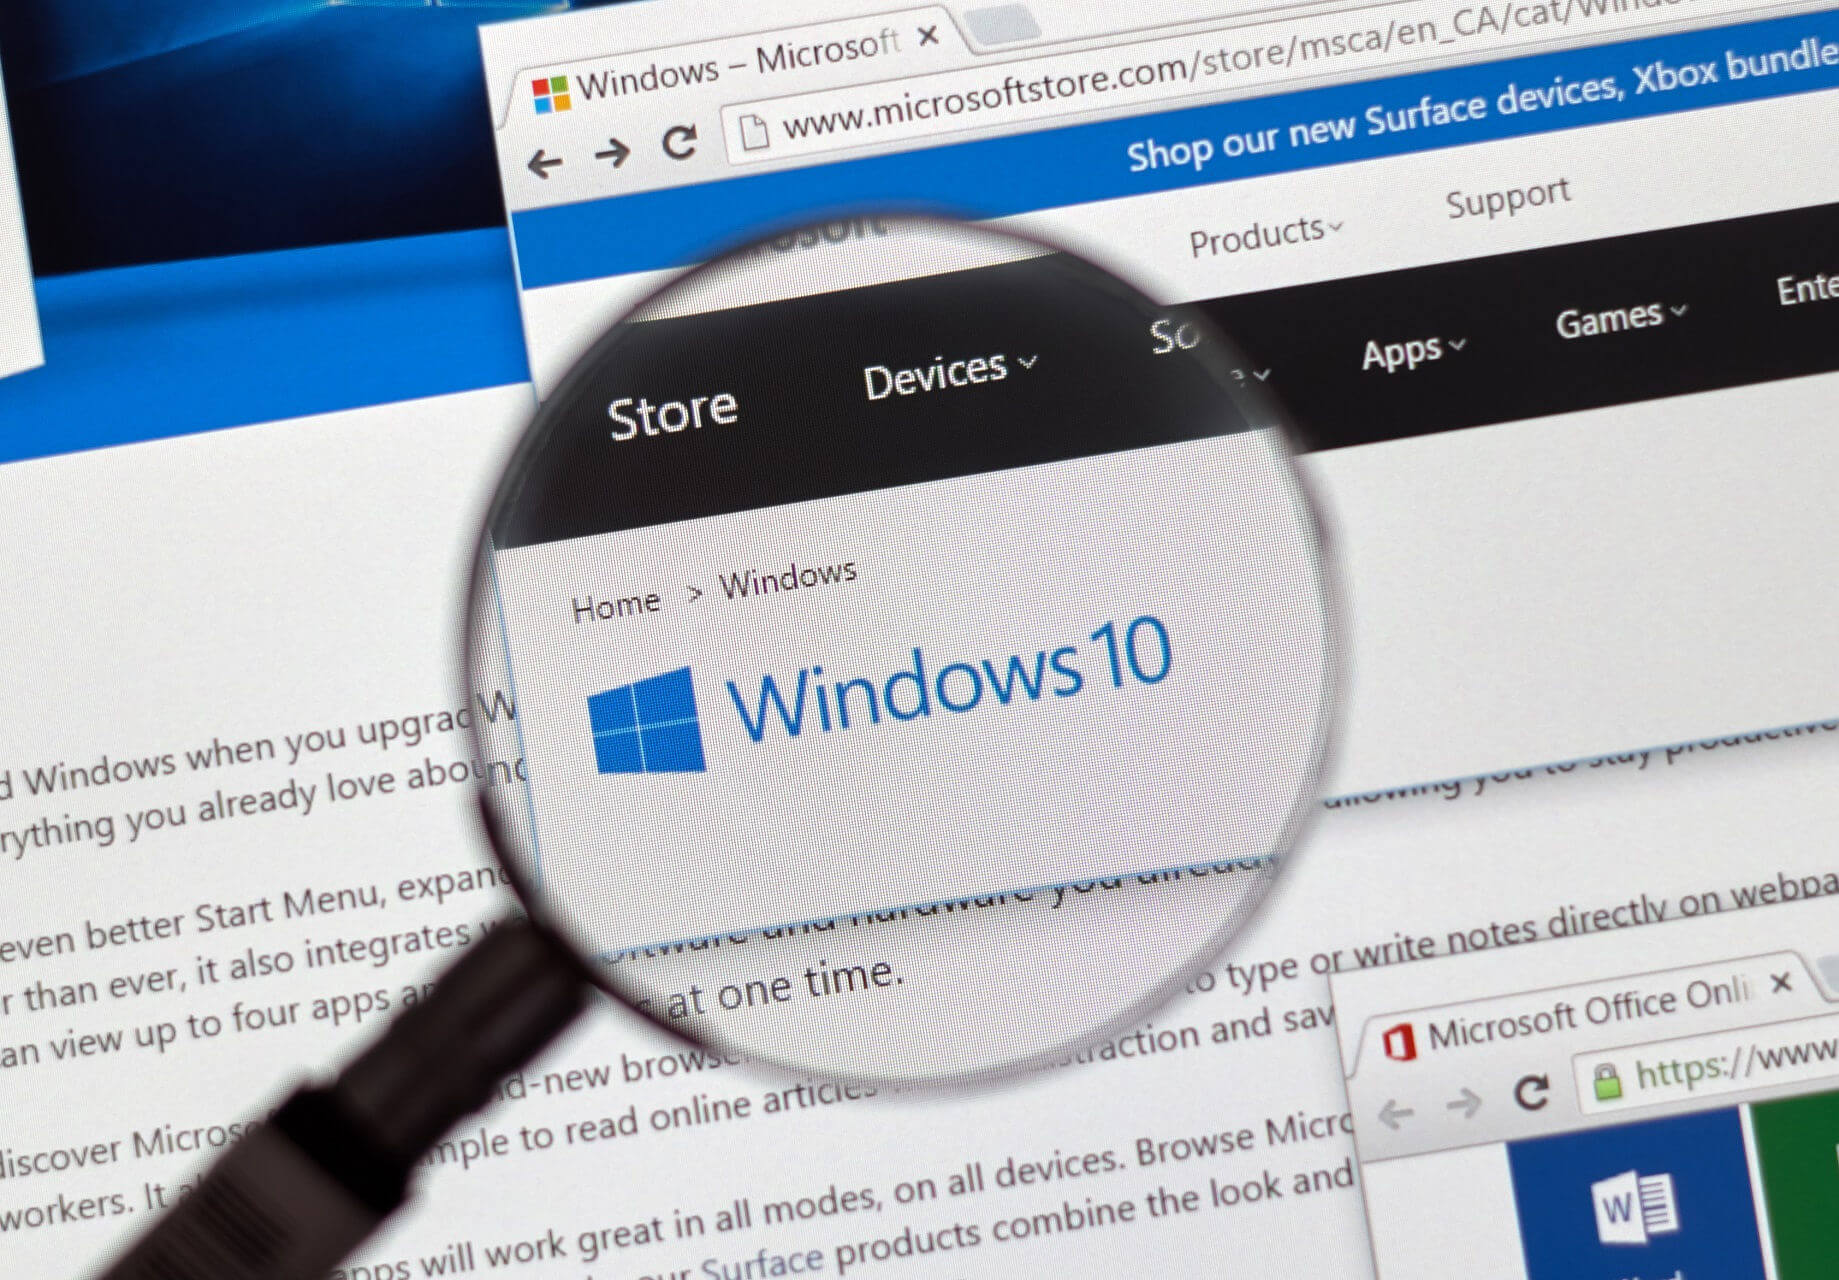 Windows 10 20H2 will install faster and includes Microsoft Edge